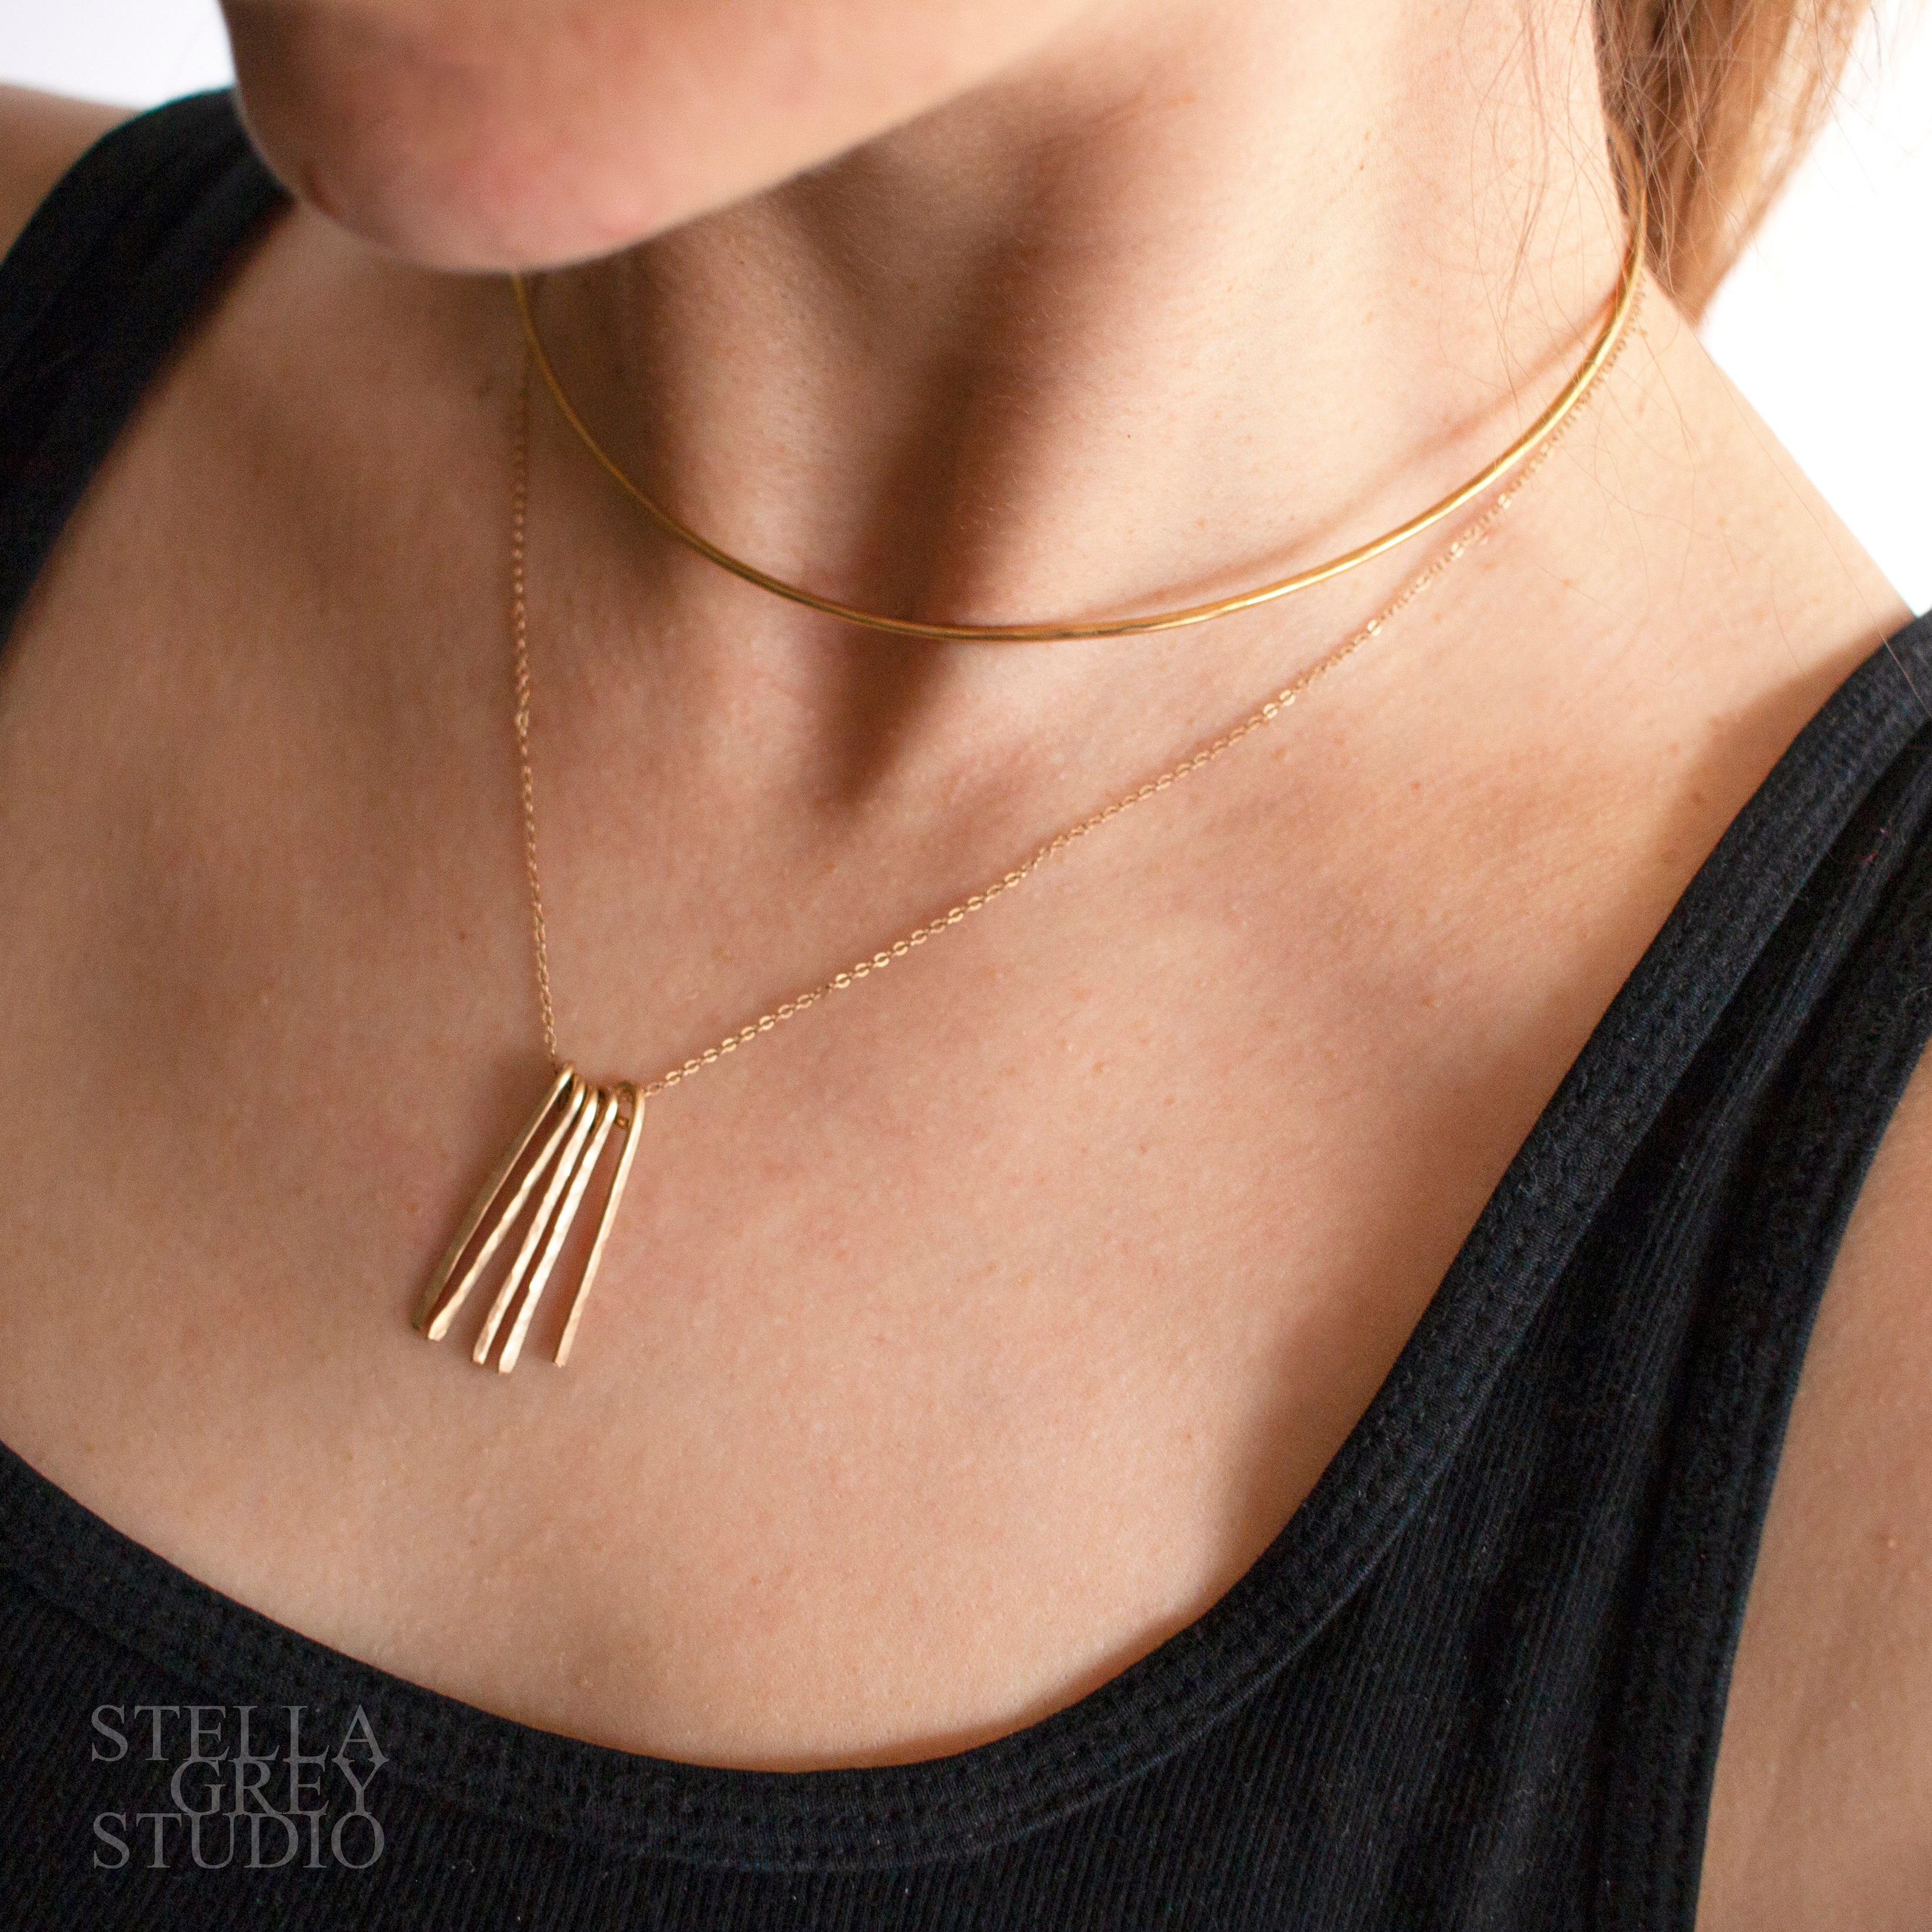 Delicate gold necklace, brass necklace, brass collar necklace, gold choker, delicate choker, boho jewelry, minimalist jewelry, gold necklace, romantic gift, bridesmaid jewelry, bridesmaid necklace, simple necklace, everyday jewelry, gold jewelry. 